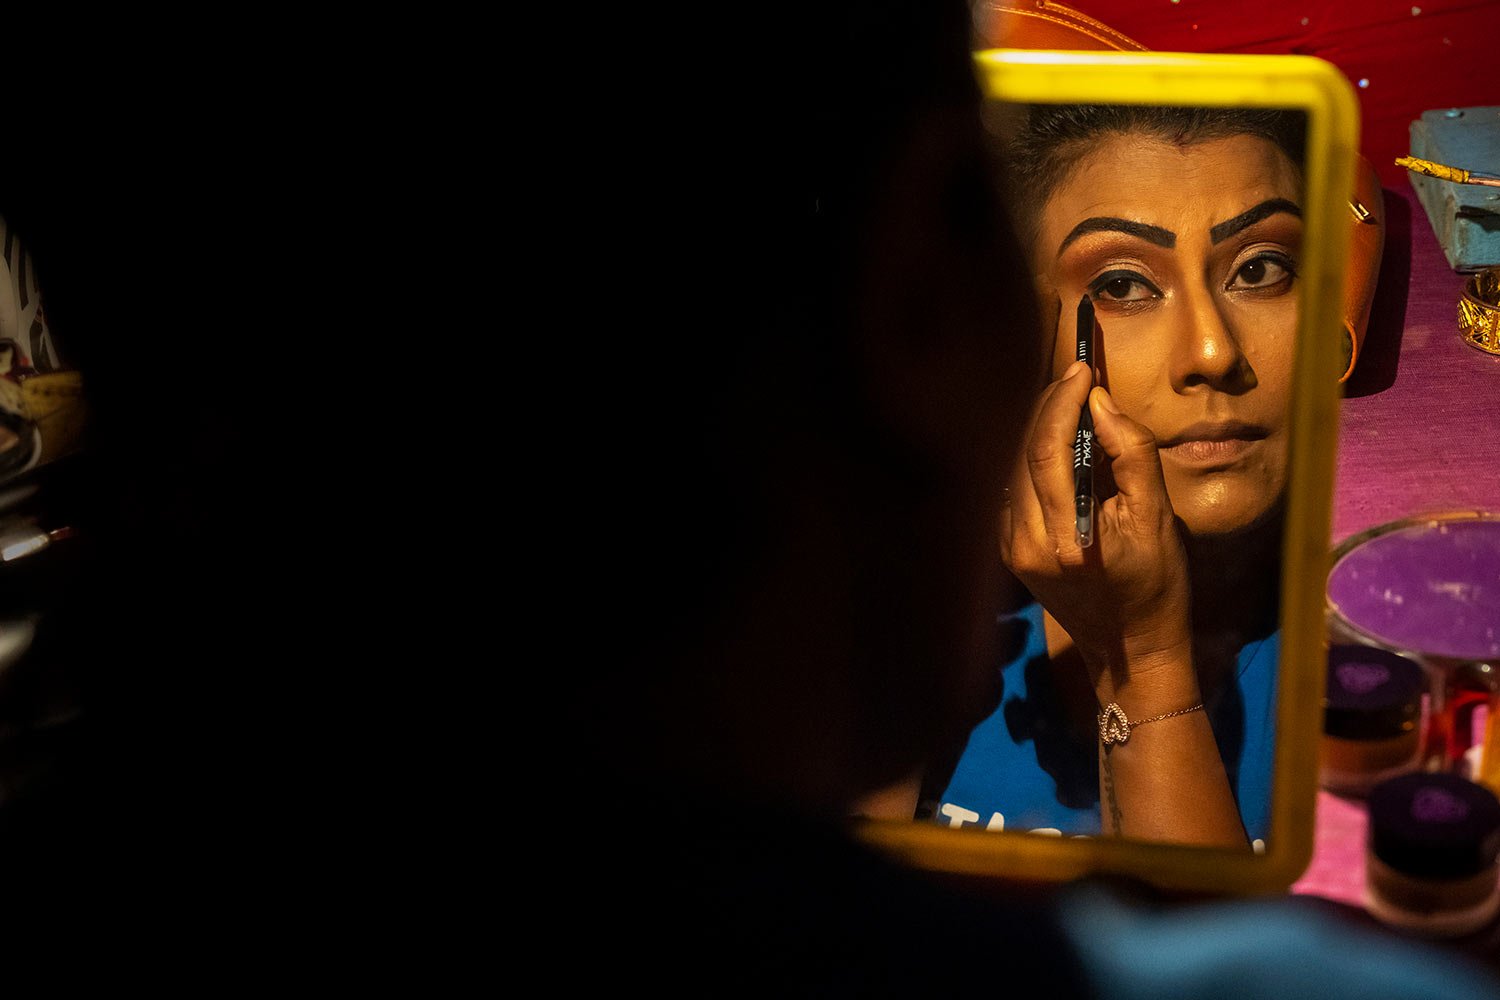  Prastuti Parashar, owner and lead actor of Awahan theater, prepares for a performance at Xetali village, east of Gauhati, India, Wednesday, April 6, 2022. (AP Photo/Anupam Nath) 